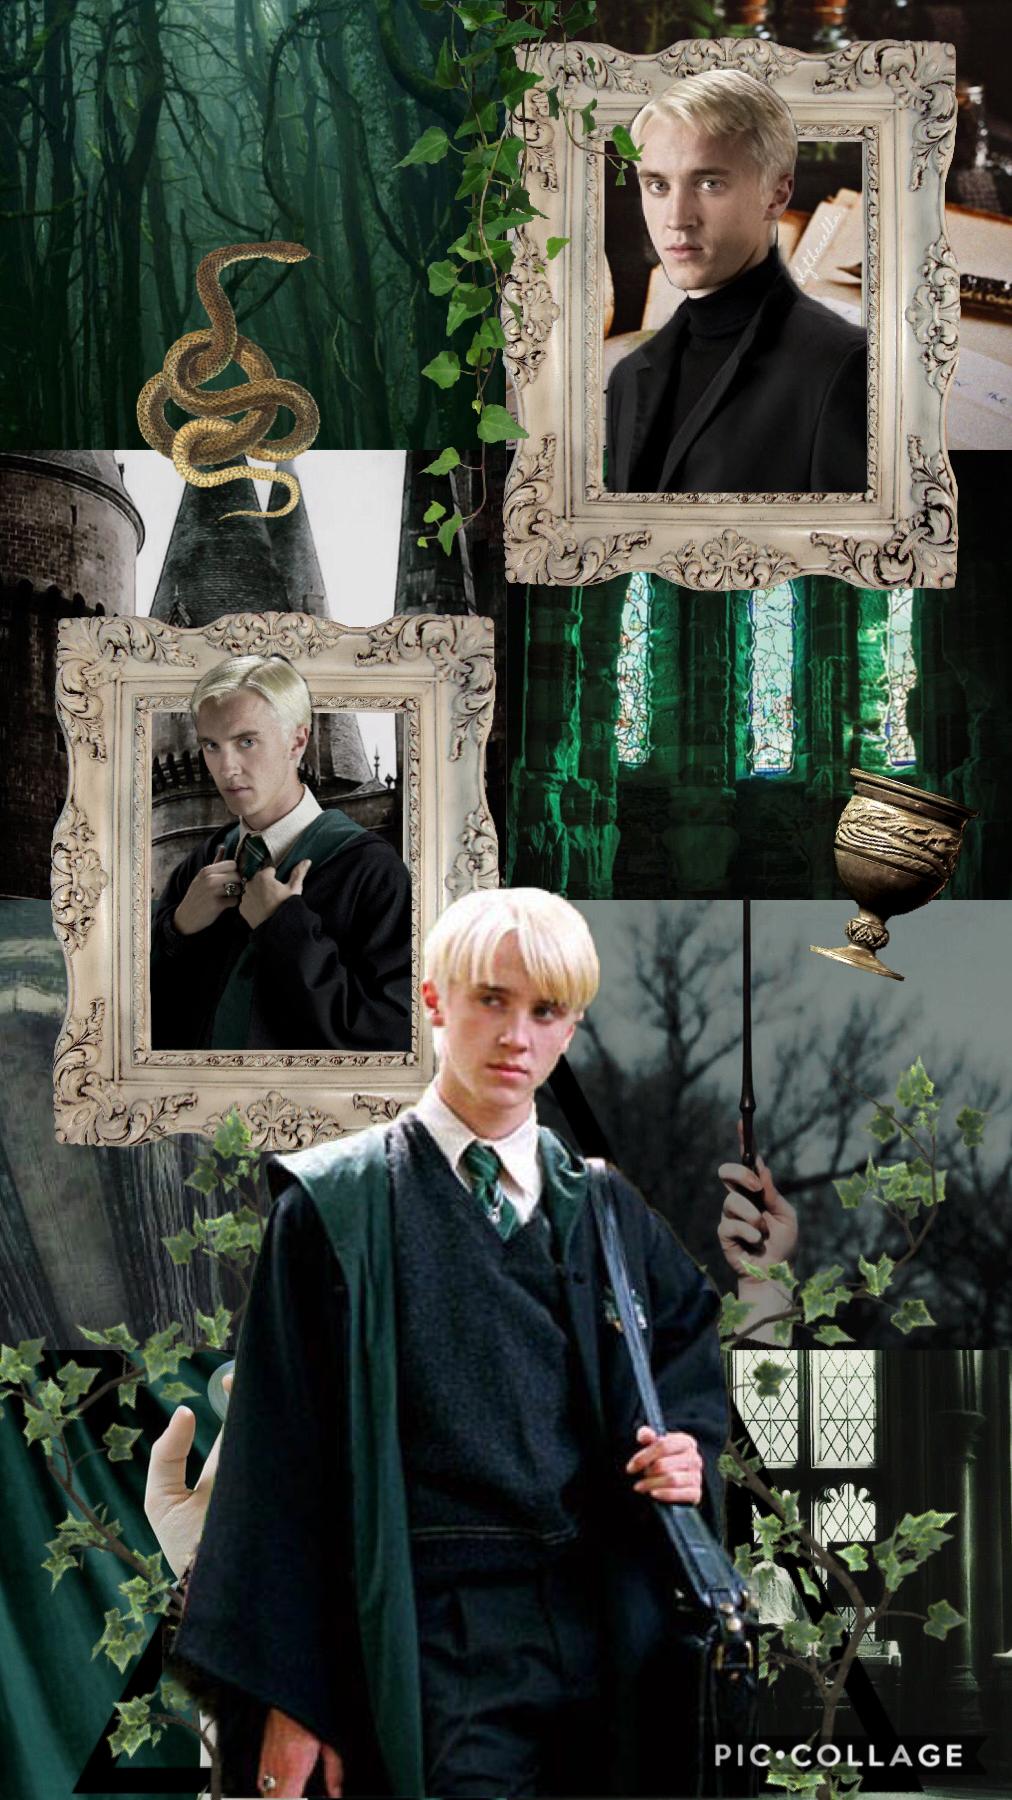 Draco has been all over tiktok so I thought I’d bring him here too 😂